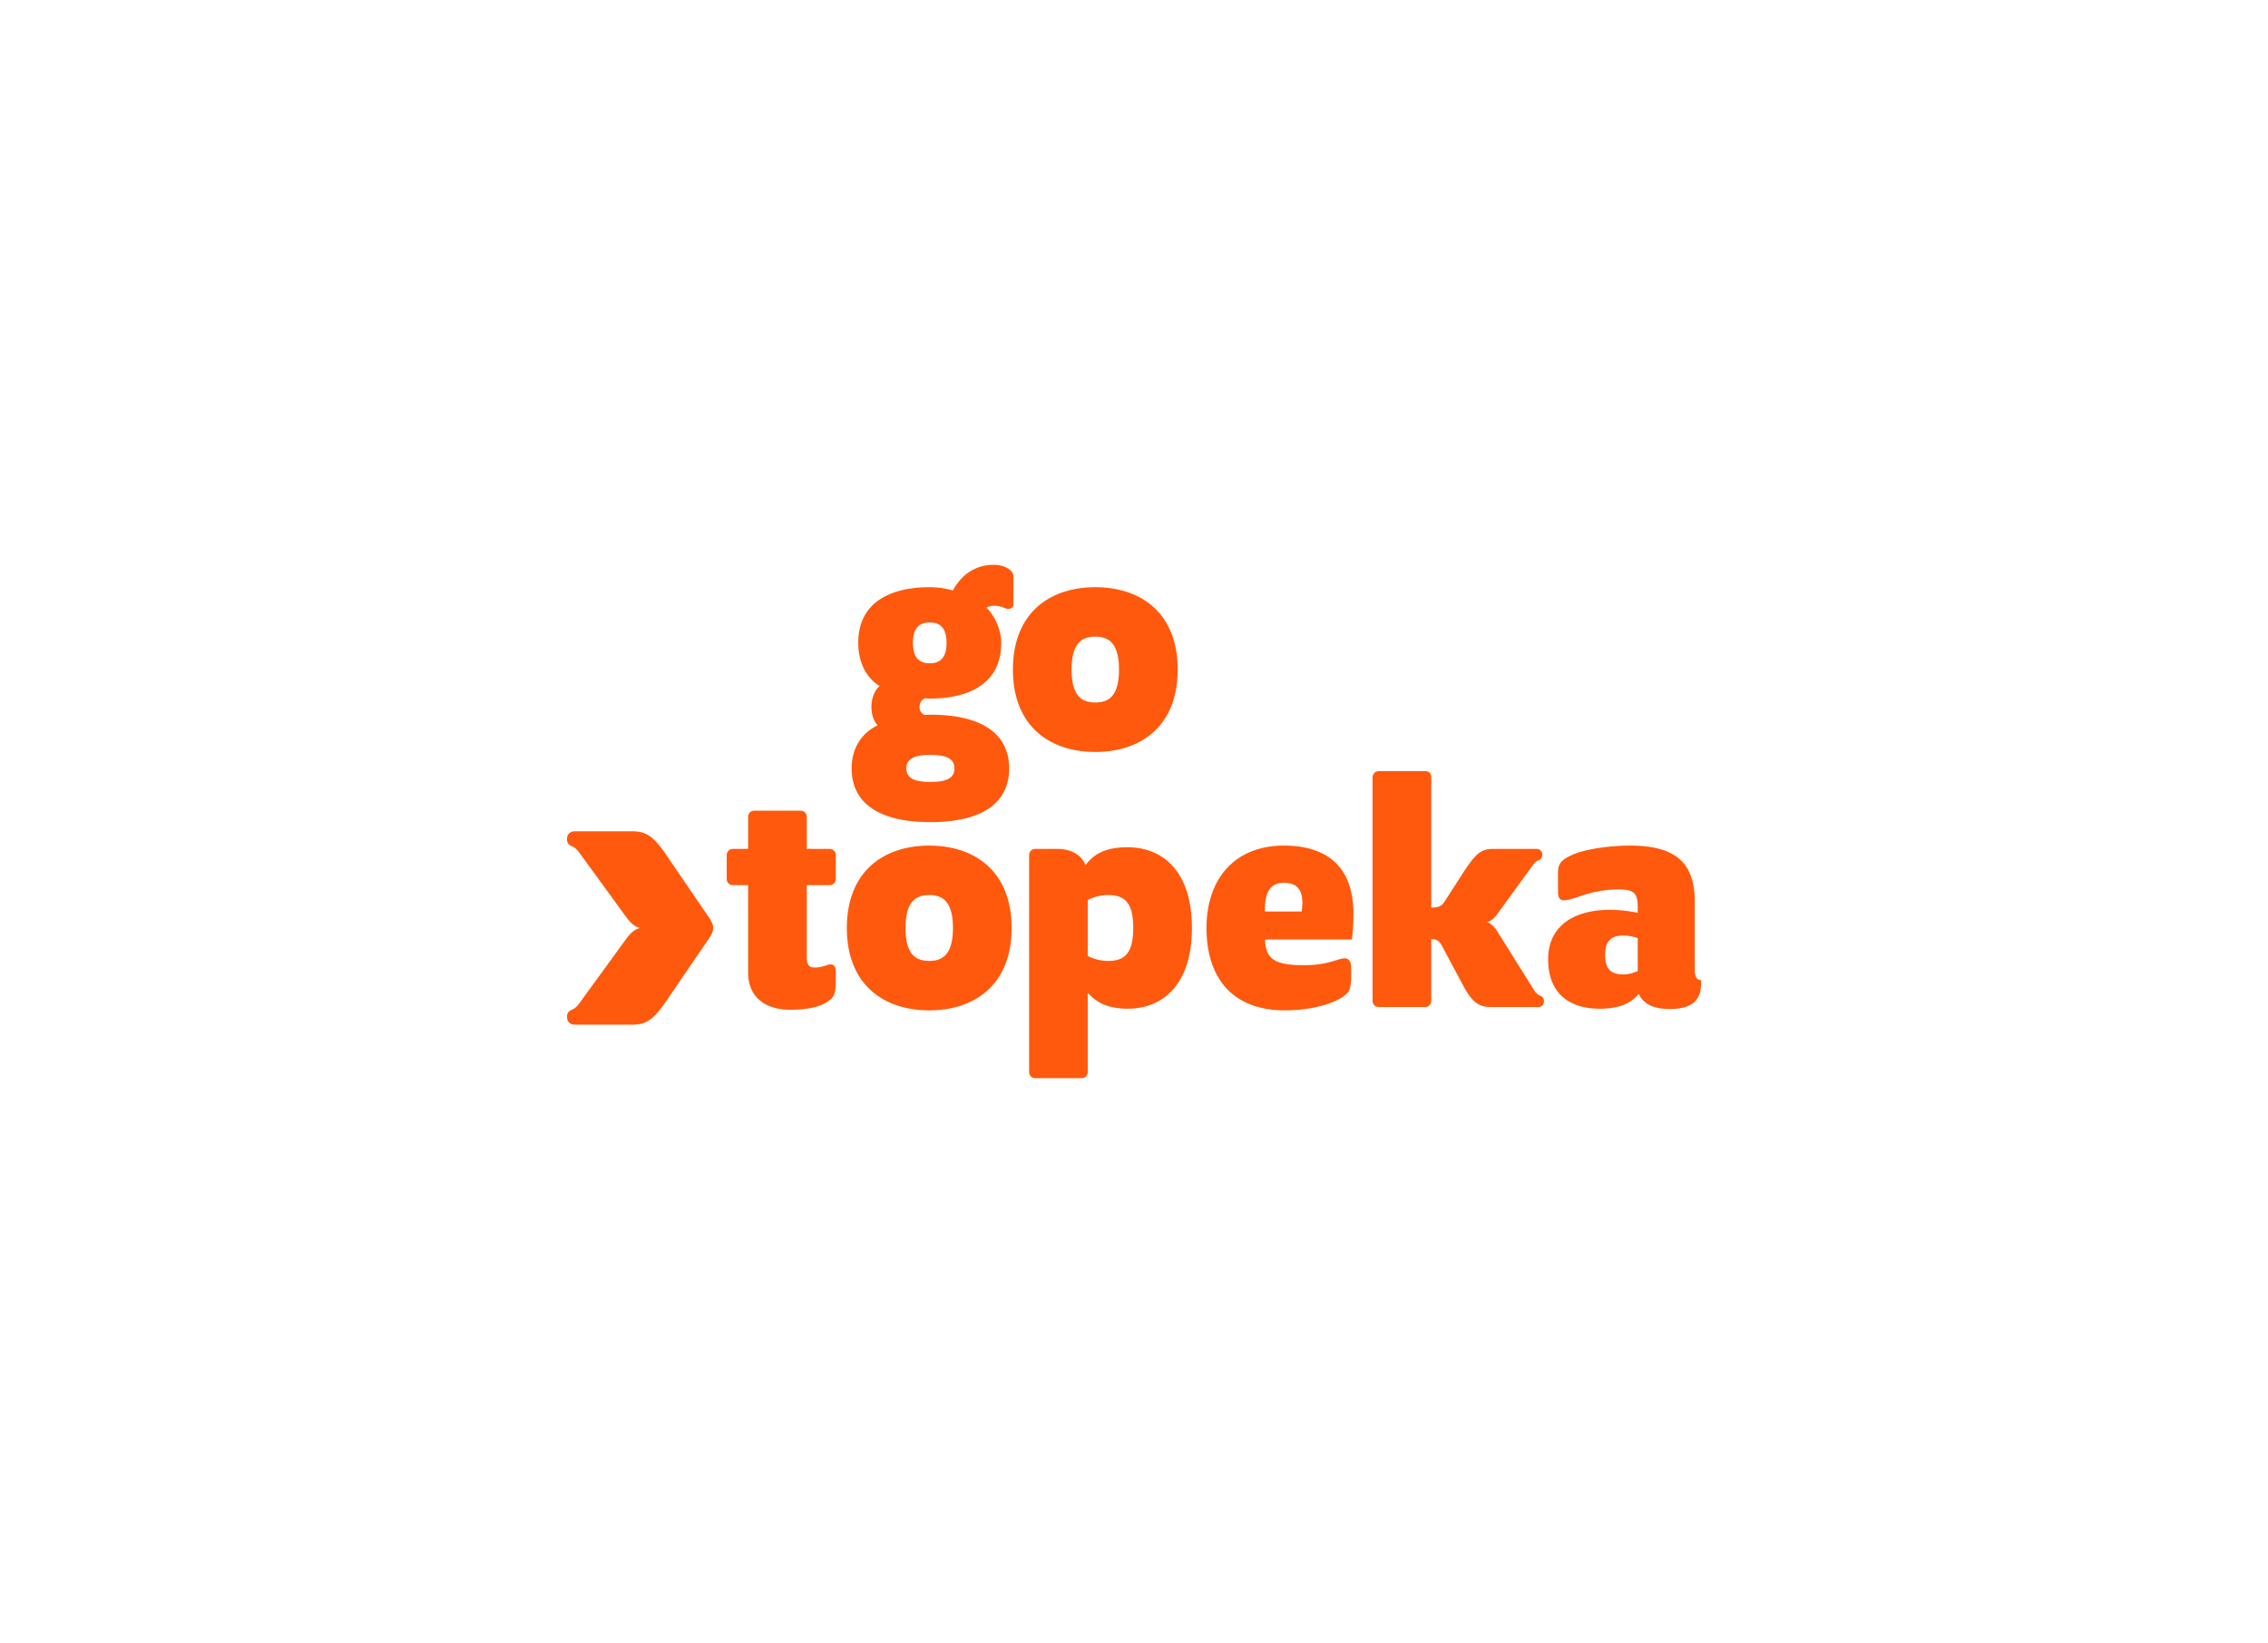 GO Topeka creates opportunities for economic growth that contribute to a thriving business climate and fulfilling lifestyle in Topeka and Shawnee County.